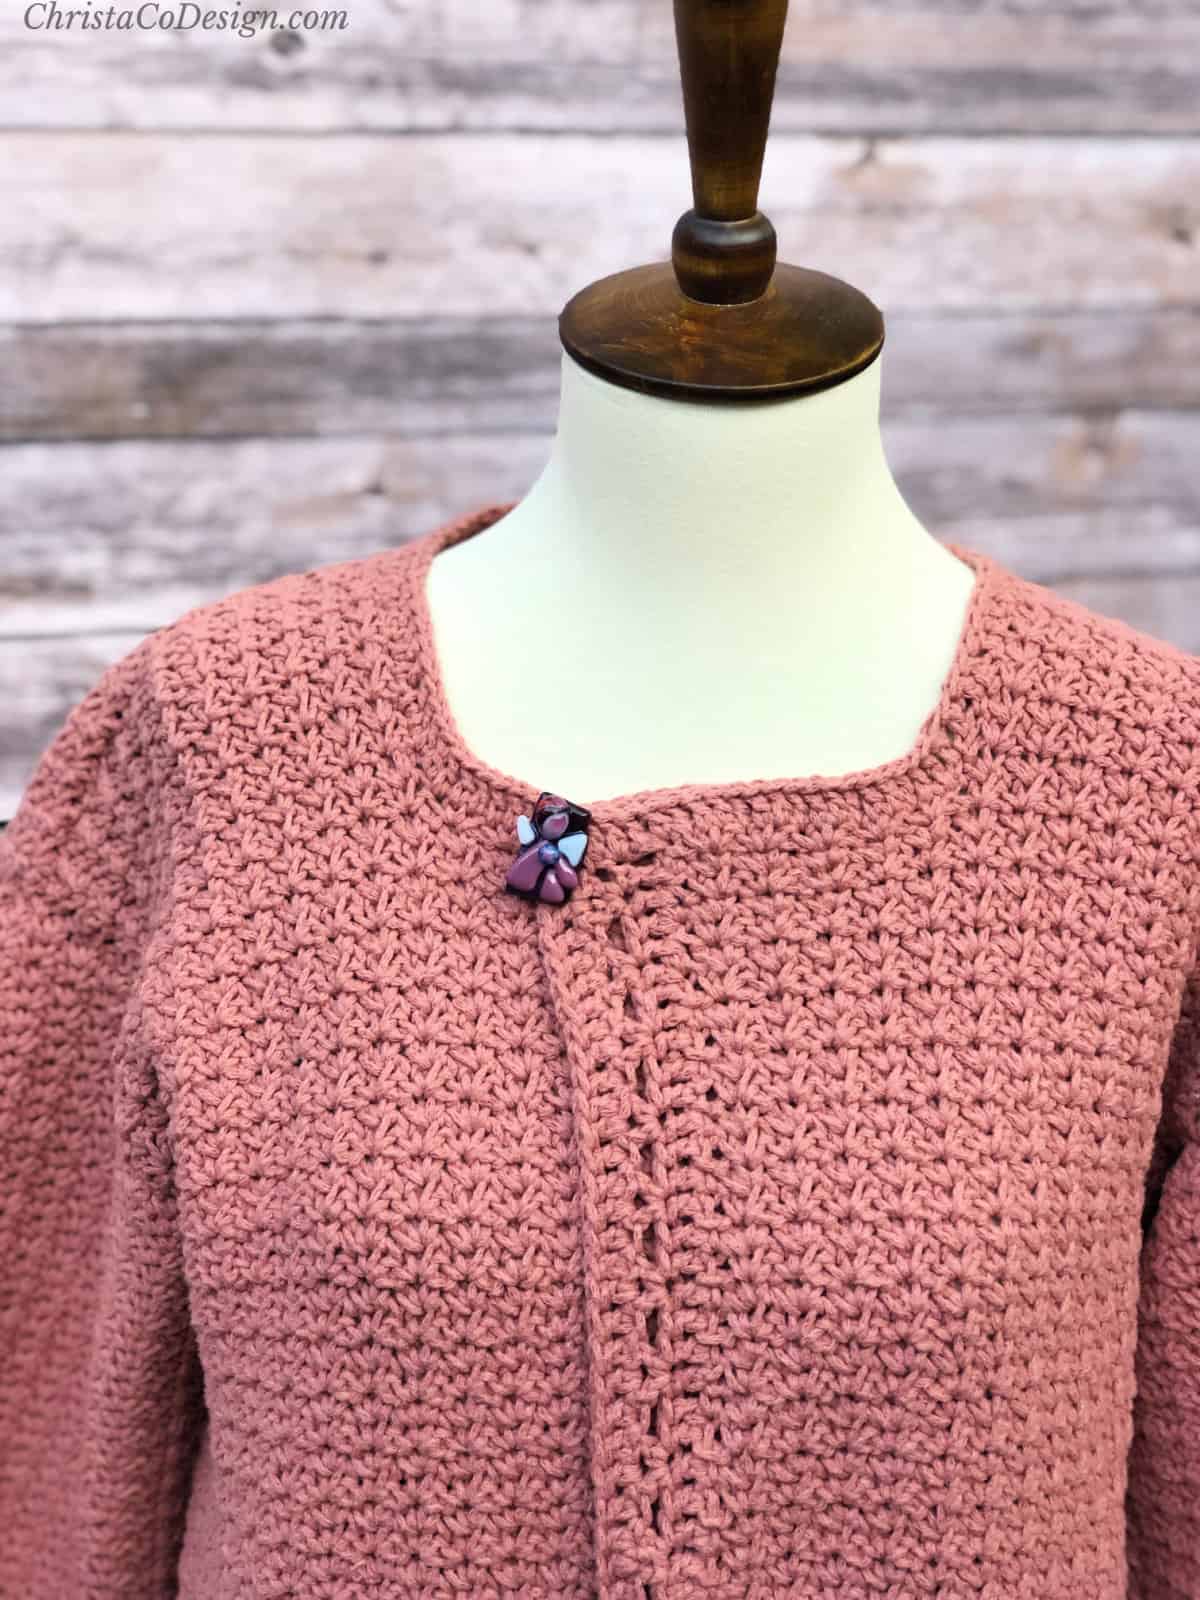 The Positano Crochet Cardigan a Free Pattern with Pockets!